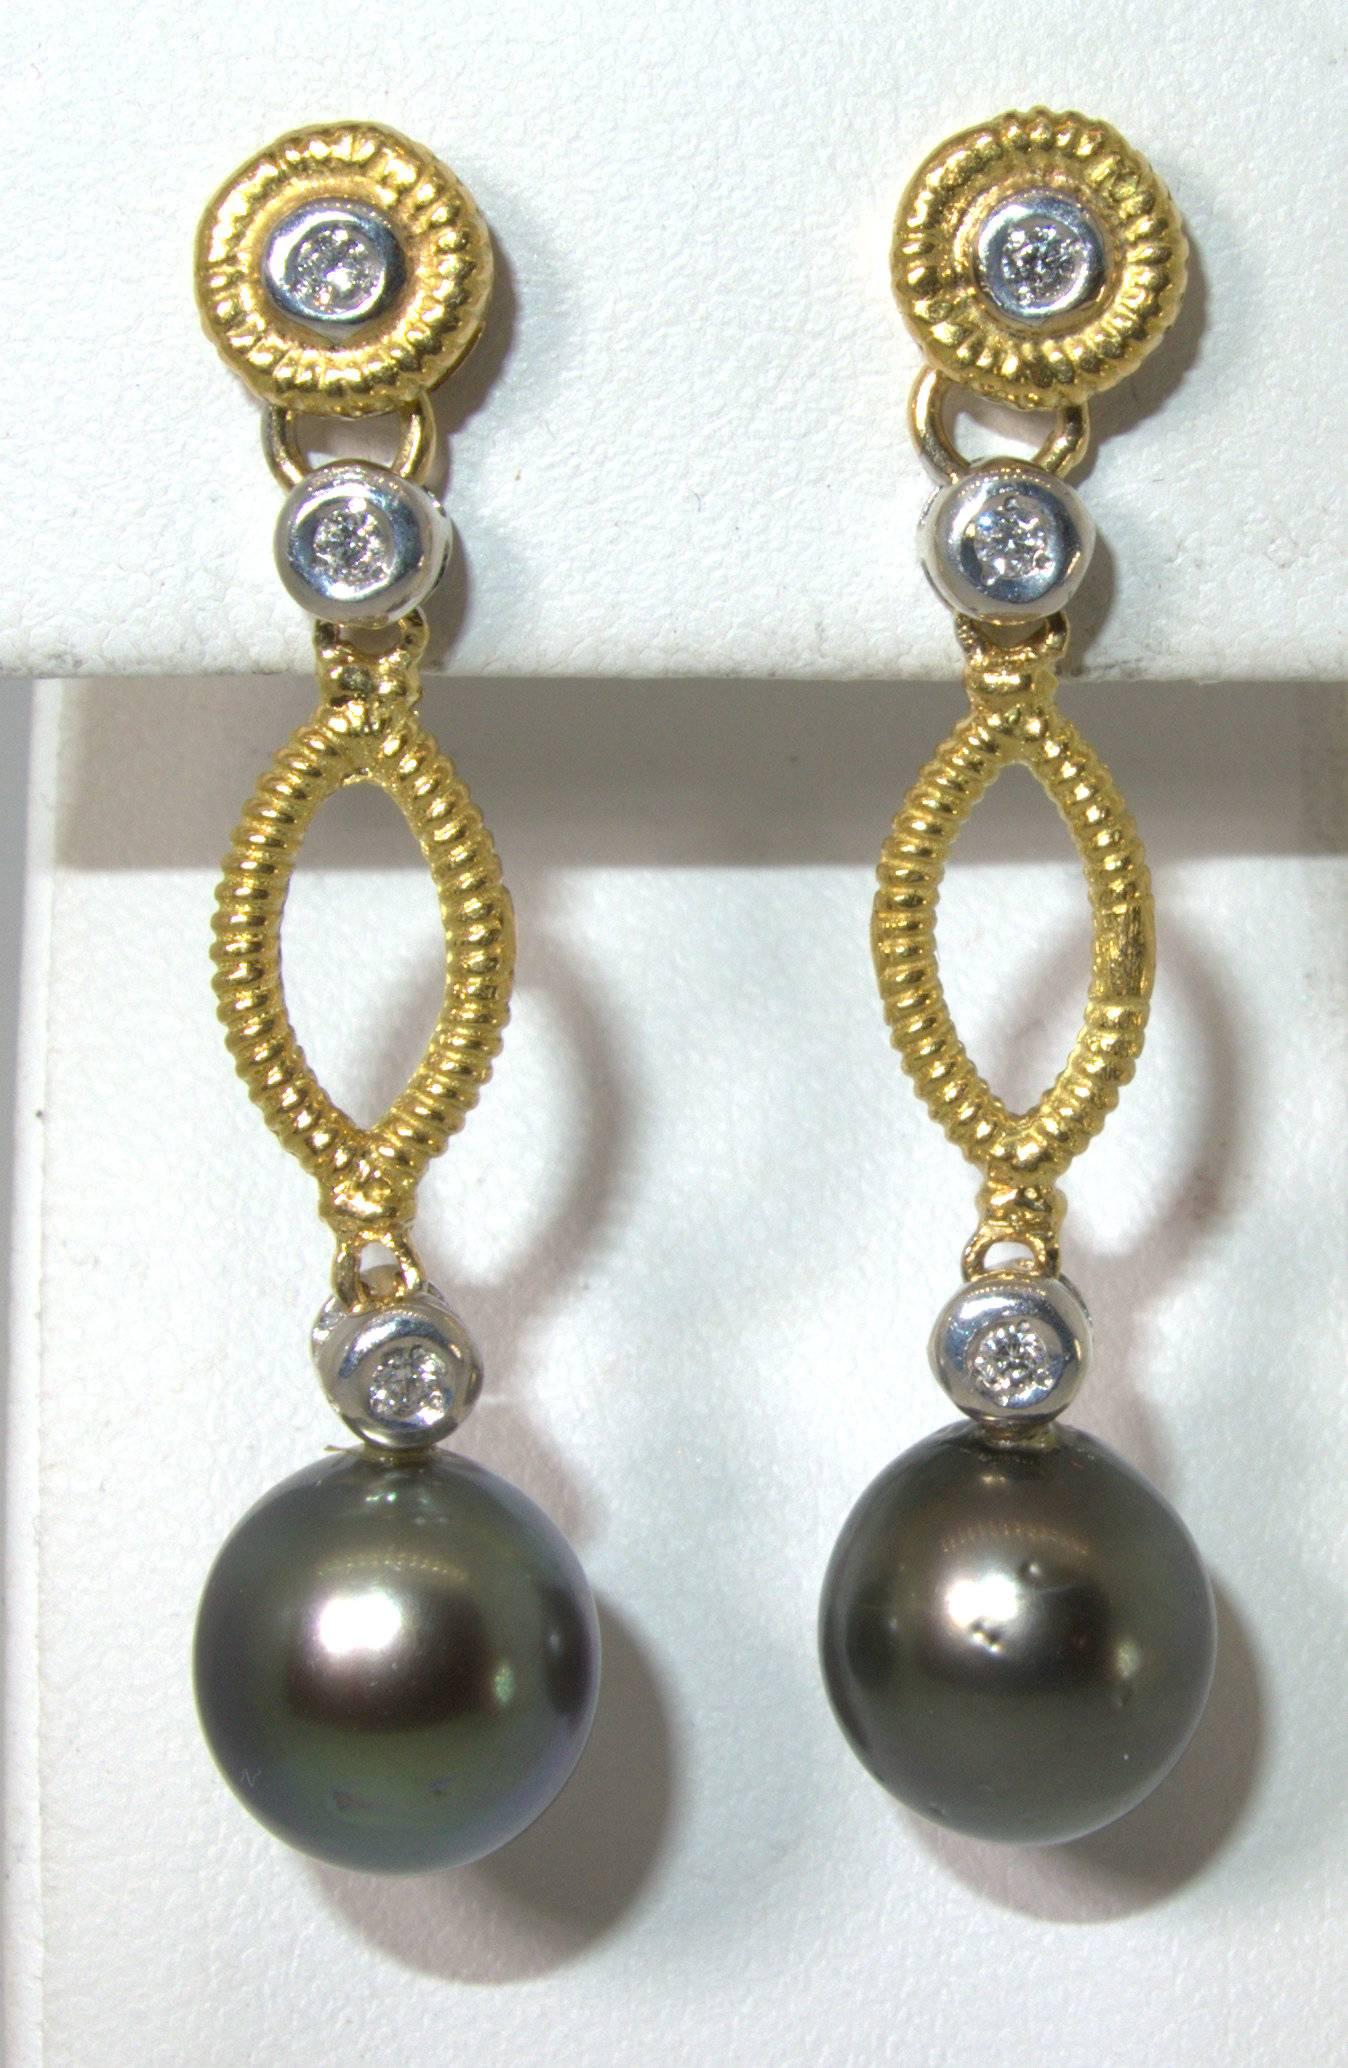 18K yellow gold suspending 10 mm. matching black pearls which are accented with wound modern brilliant cut diamonds which all set in 18K white gold.  These earrings weigh 7.5 grams, are just over 1.5 inches long.